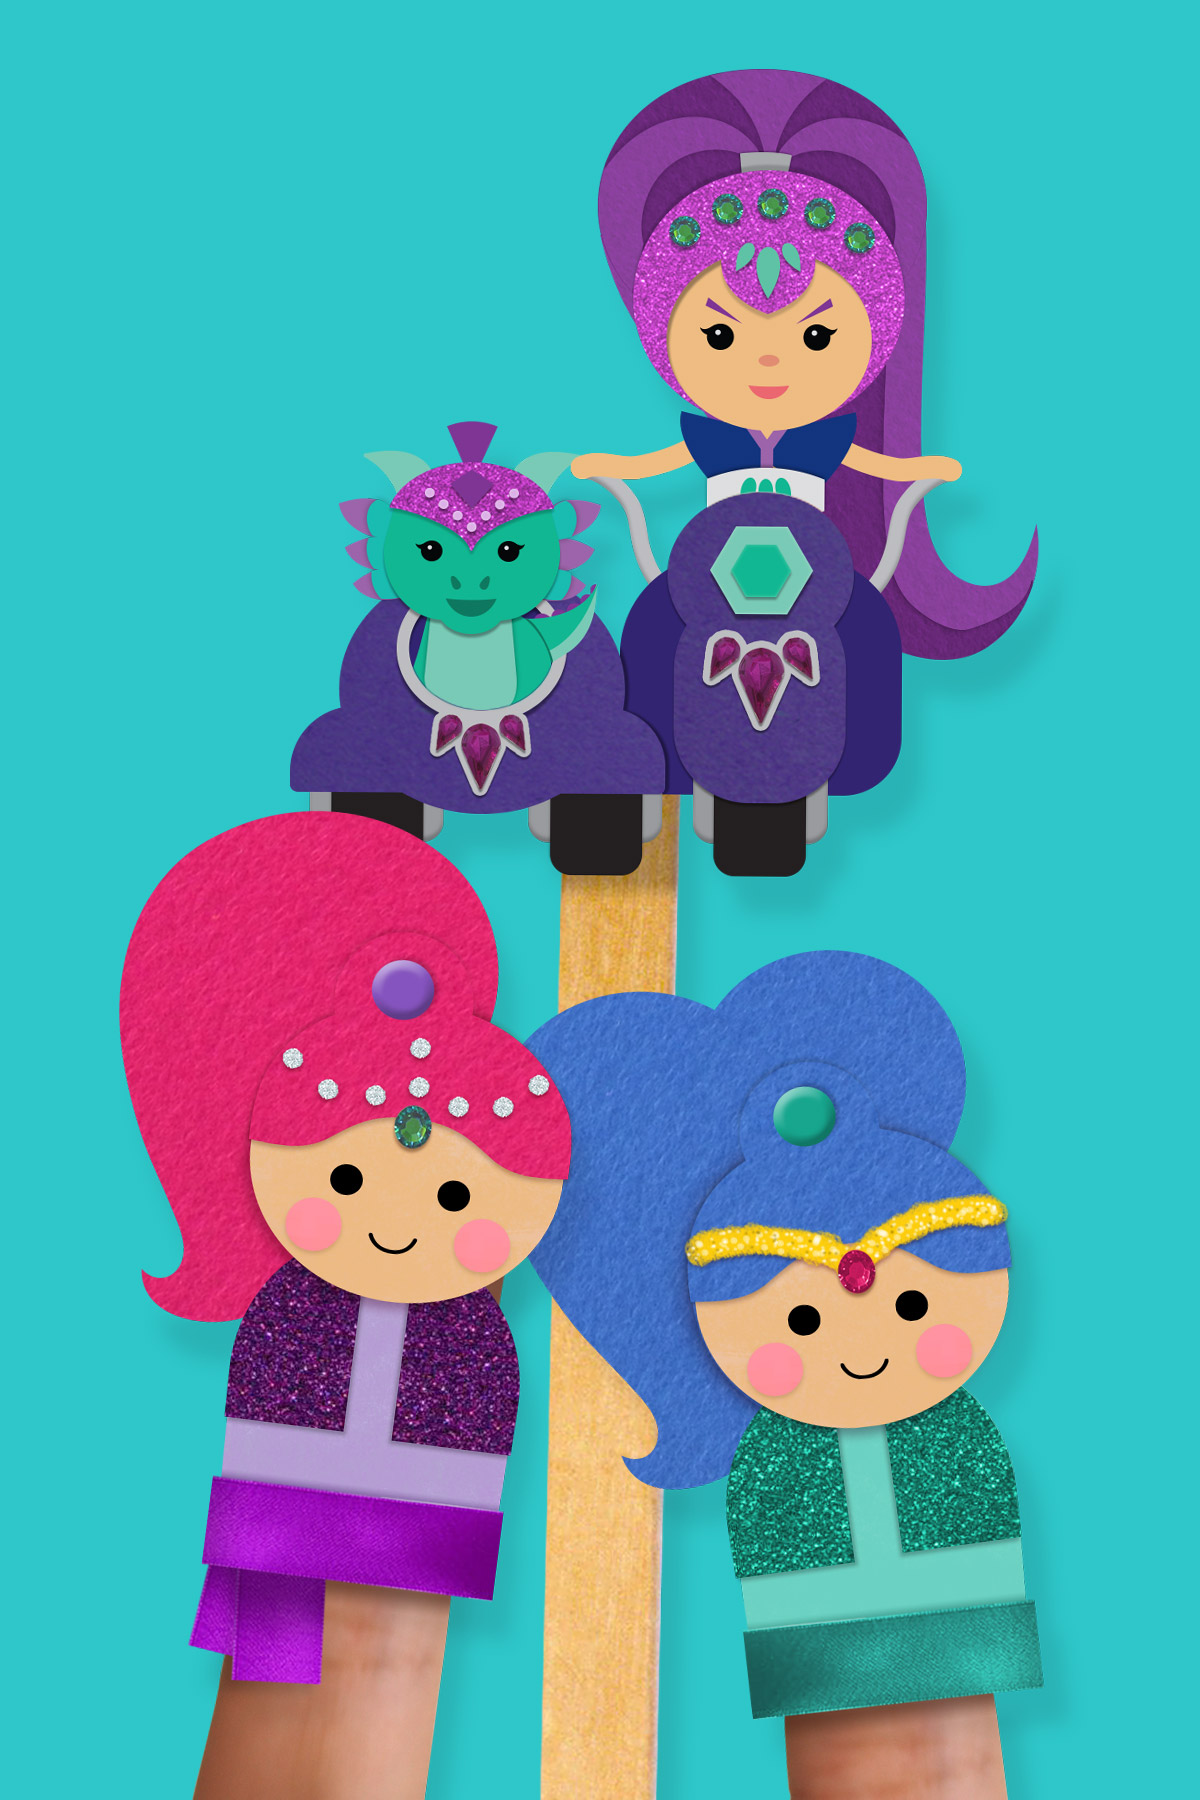 lindre telt Meget Shimmer and Shine "Pinkie Pals" Finger Puppets | Nickelodeon Parents